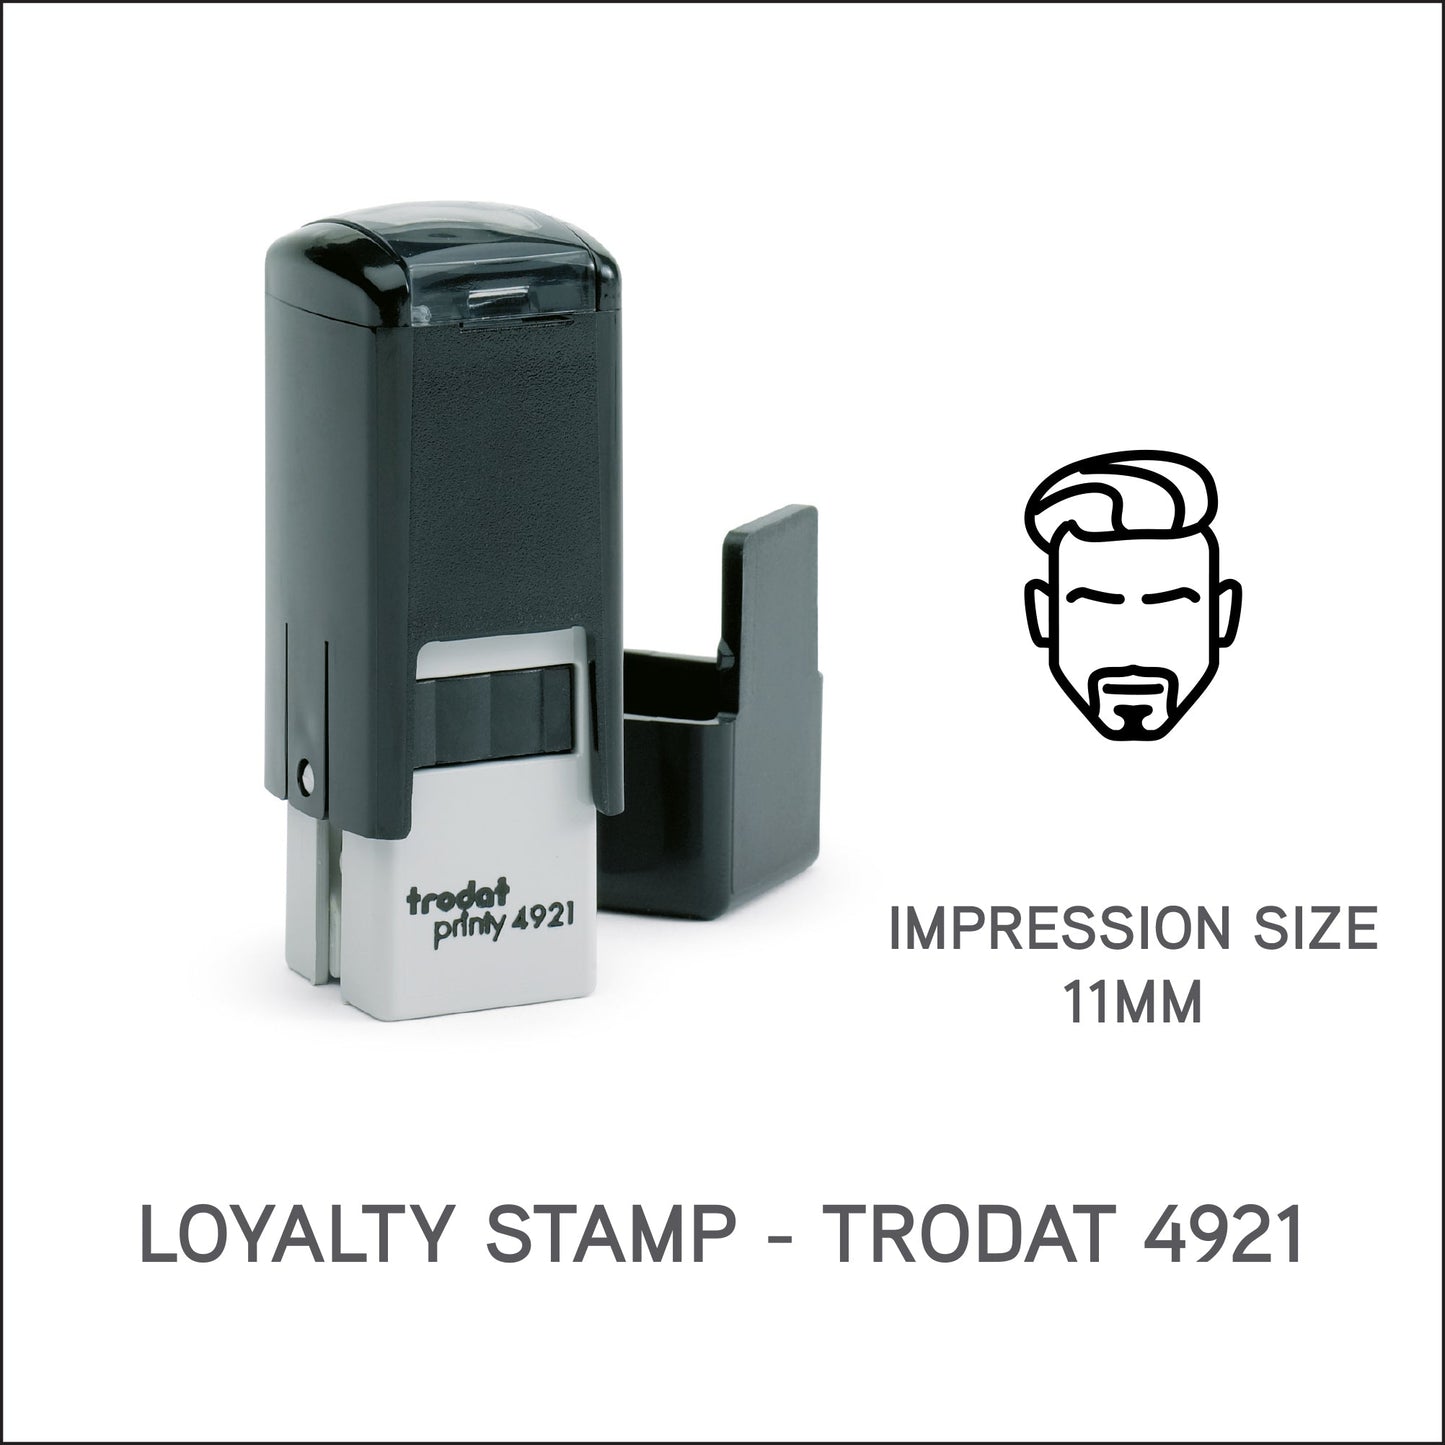 Gents Face - Barbers Loyalty Card Rubber Stamp - Trodat 4921 - 11mm x 11mm Impression